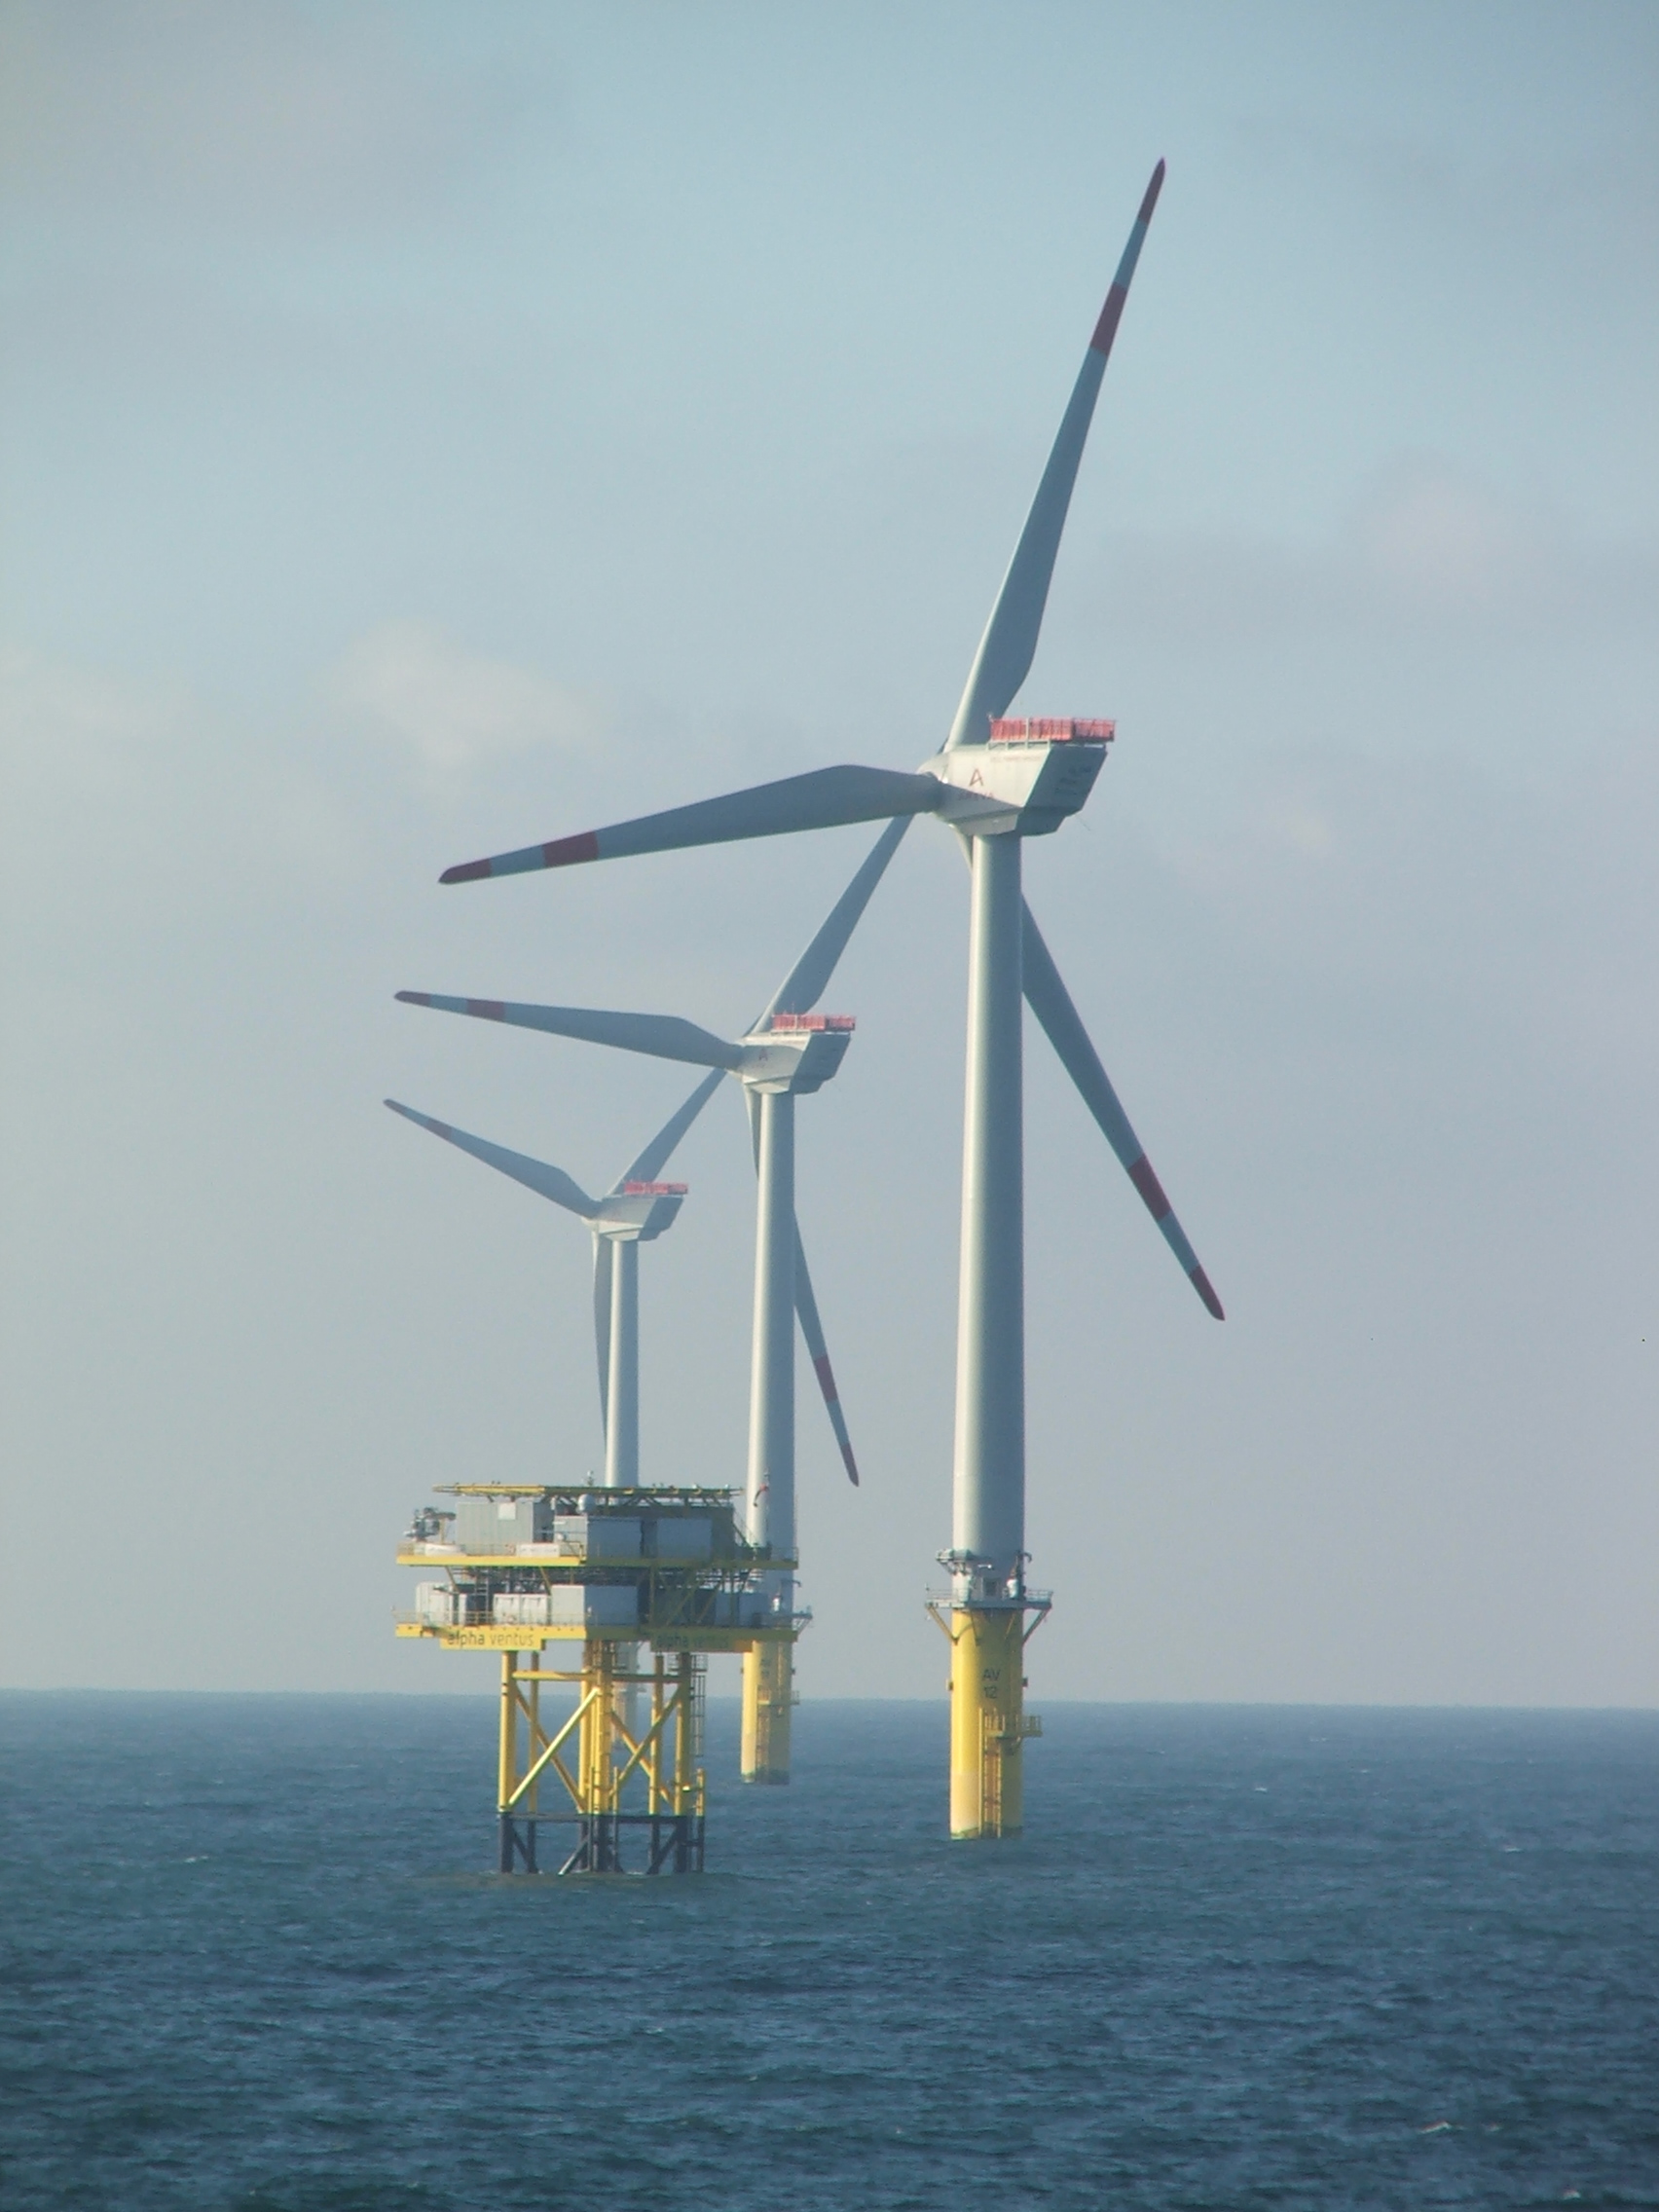 Photograph of offshore wind farm